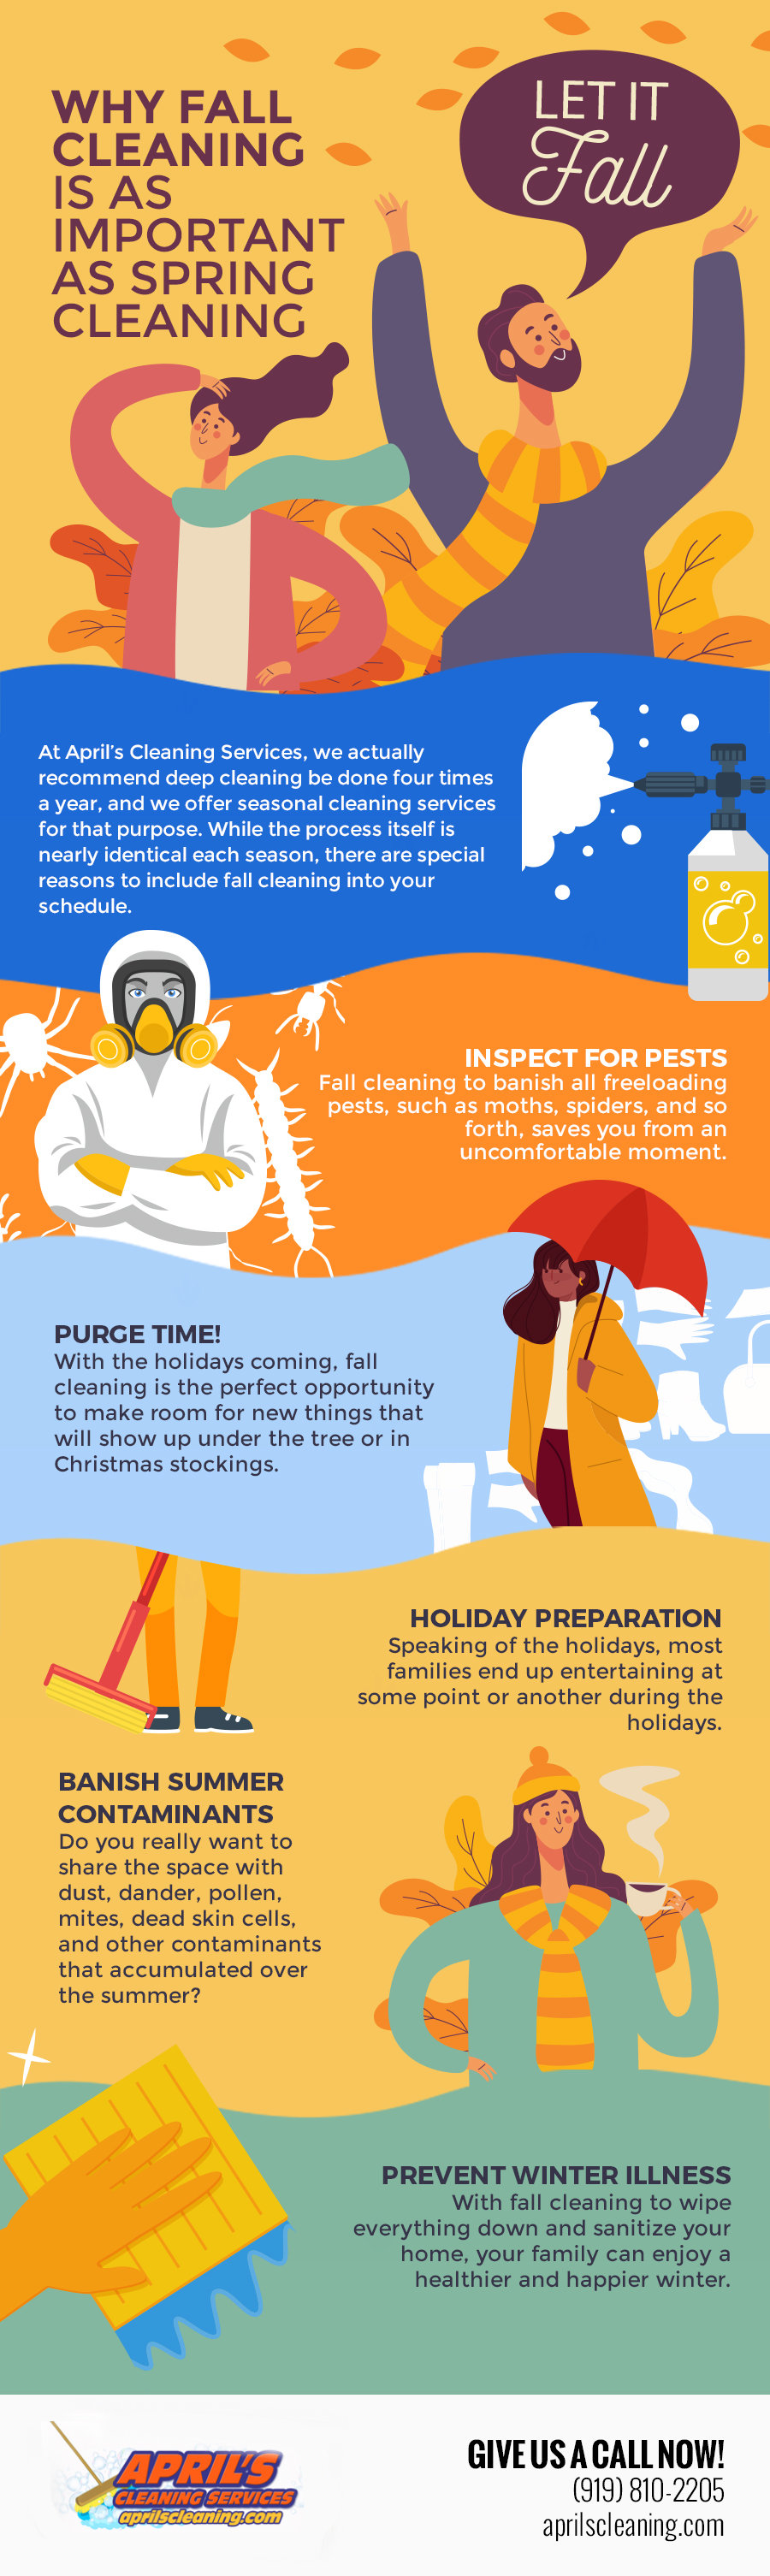 Why Fall Cleaning is as Important as Spring Cleaning [infographic]